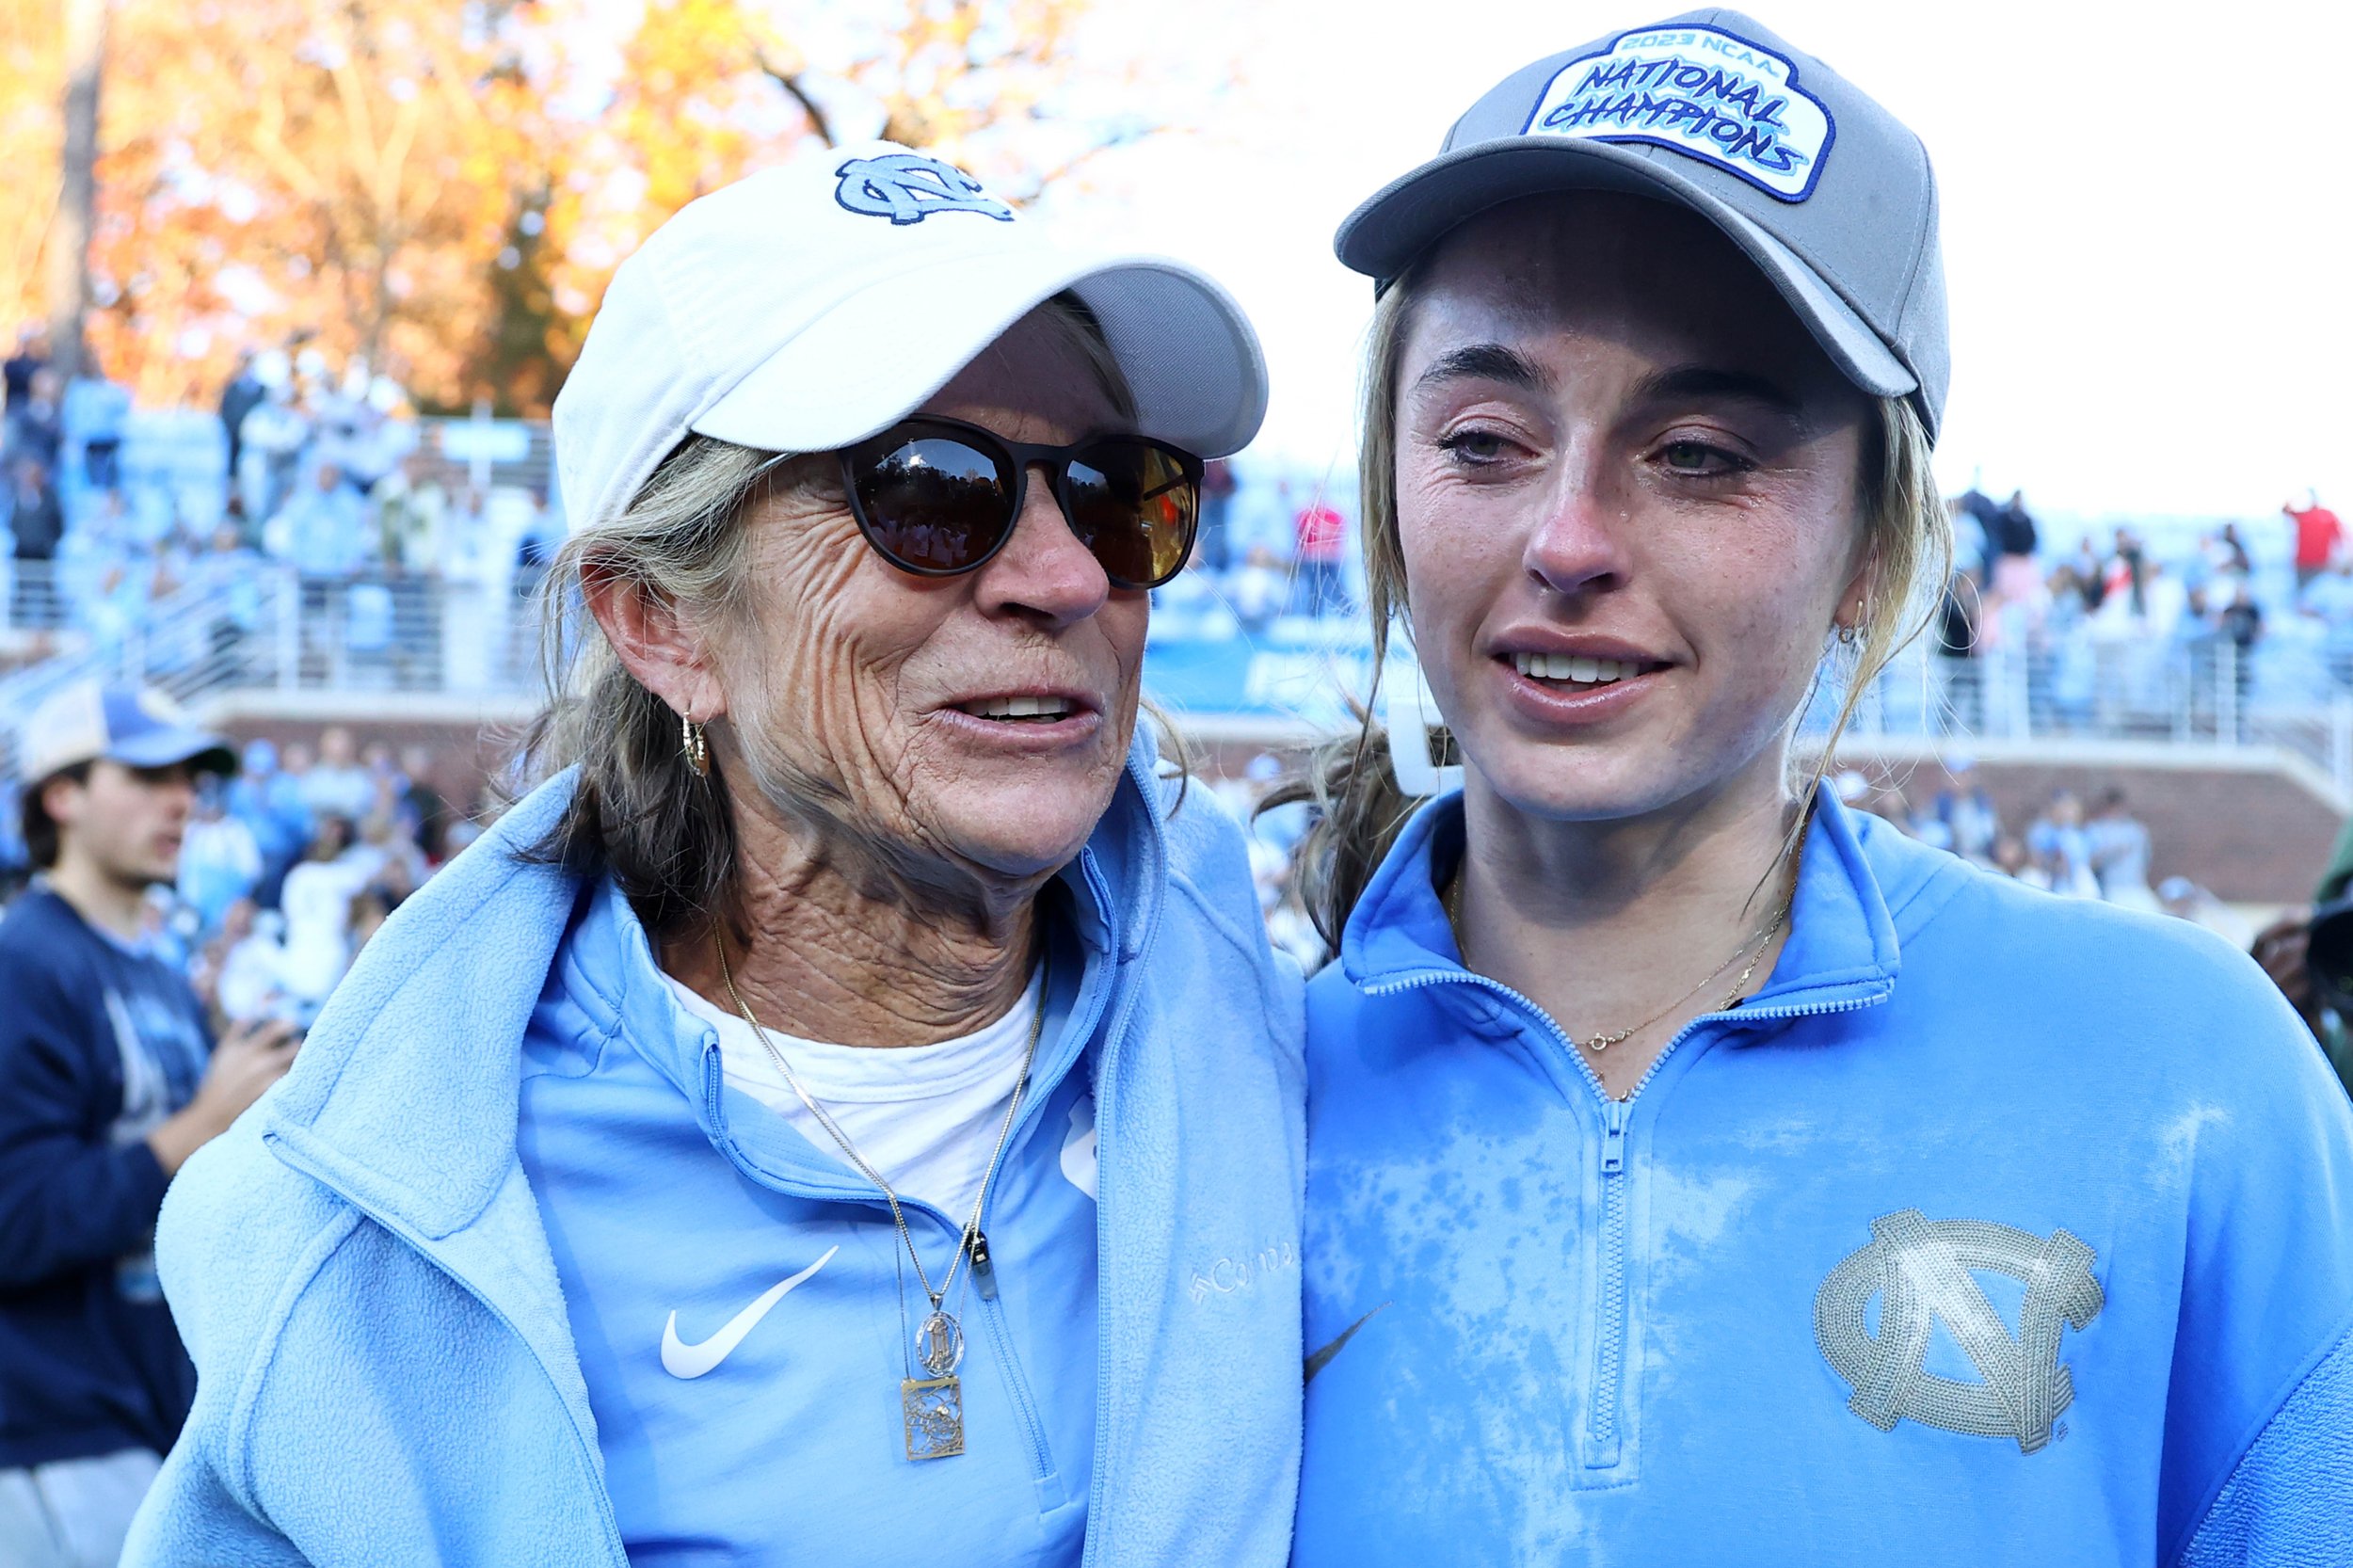  CHAPEL HILL, NORTH CAROLINA - NOVEMBER 19: Head Coach Erin Matson of the North Carolina Tar Heels celebrates with former head coach Karen Shelton after defeating the Northwestern Wildcats for the national title during the Division I Women’s Field Ho